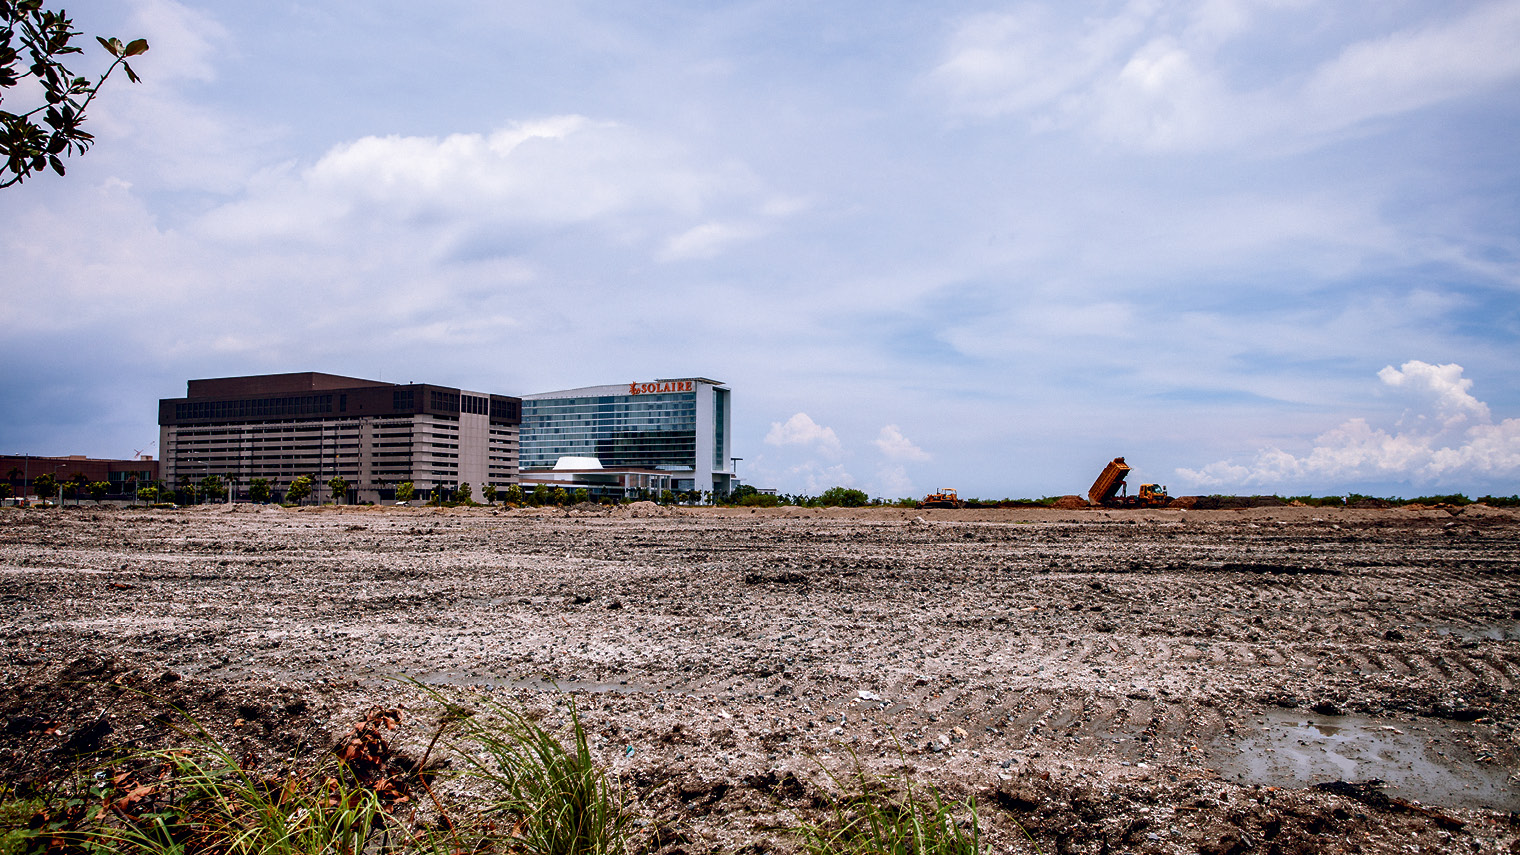 Manila’s Entertainment City is still under construction, and hopes to attract Asia’s gambling elite